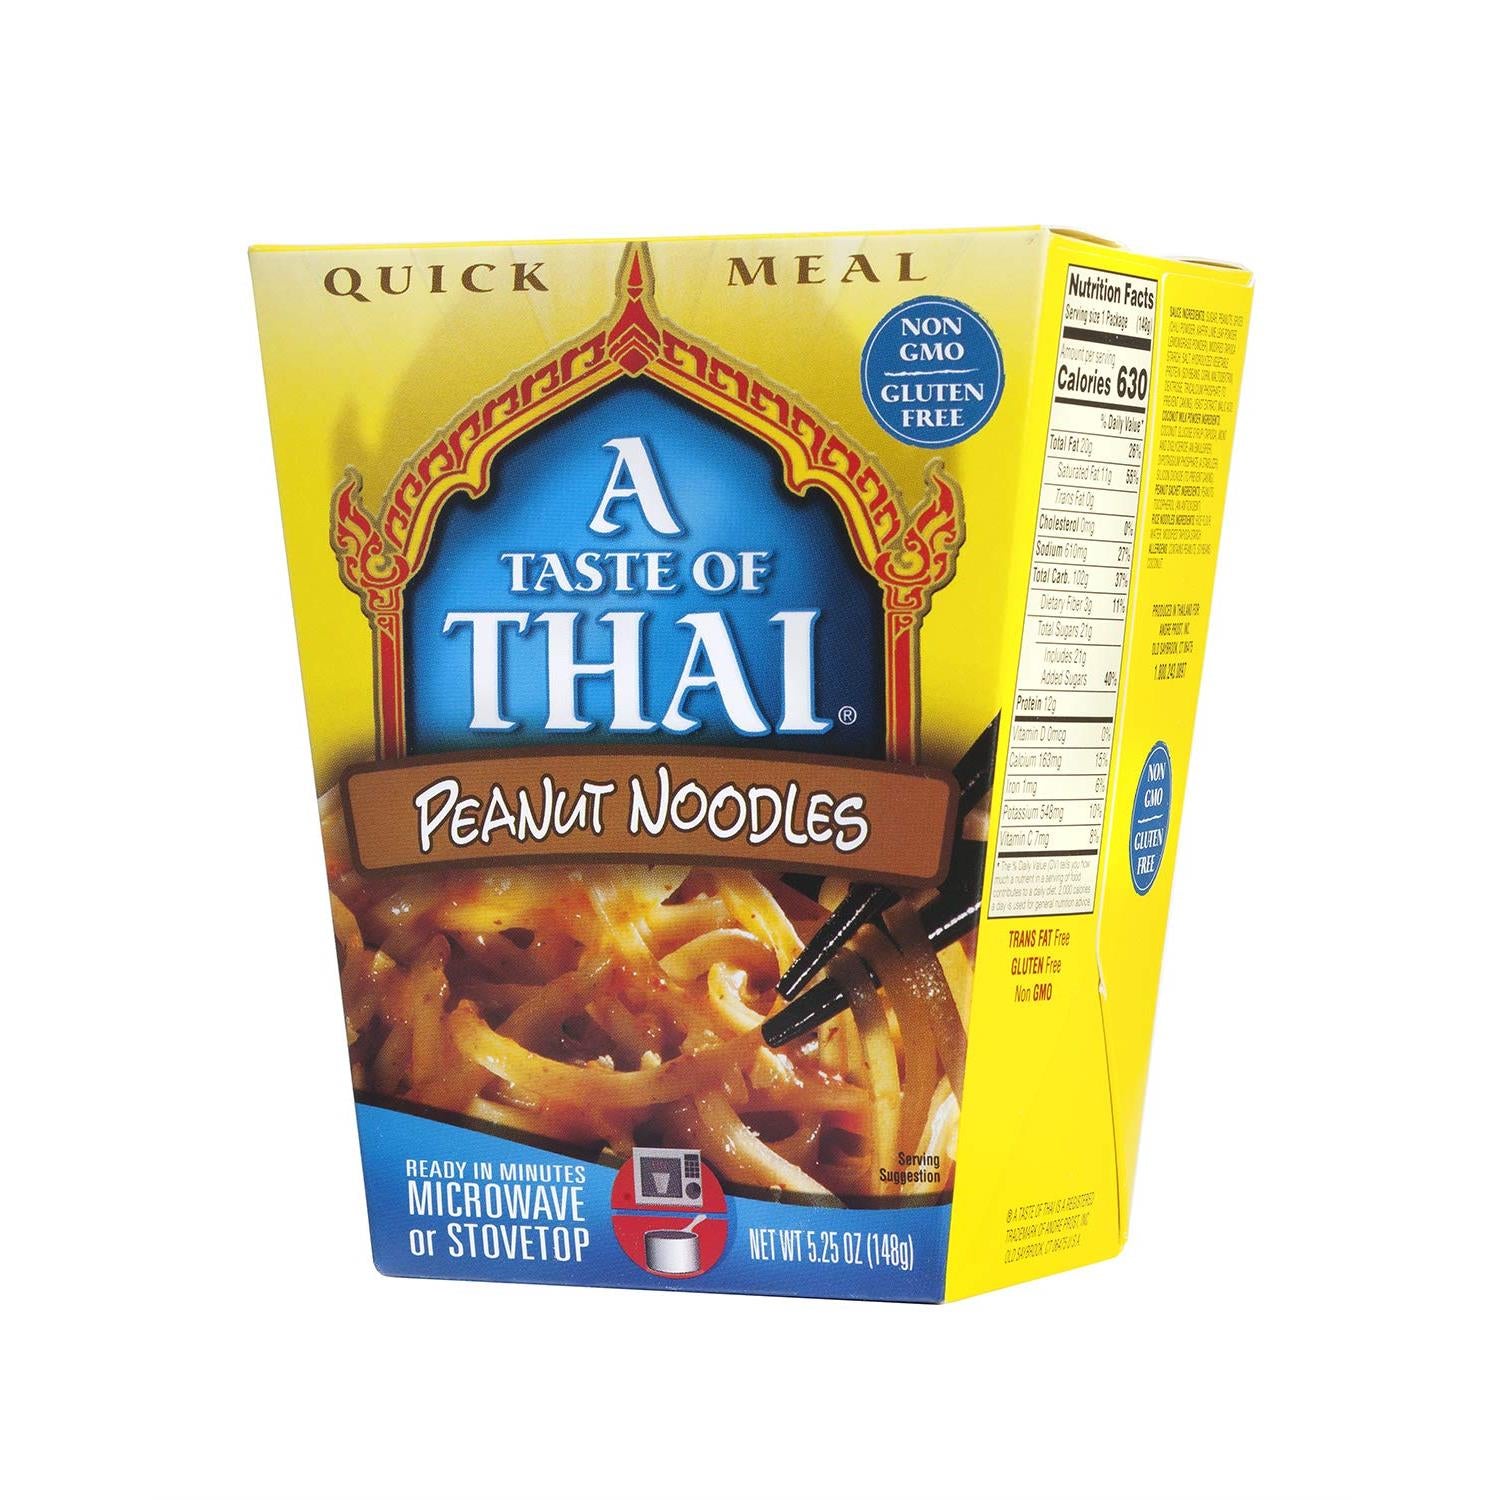 A Taste of Thai Peanut Noodles - 5.25oz Pack of 6 Heat & Eat Instant Noodles Flavored with Classic Thai Sauce | Gluten-Free | Ideal Vegan Meal | Perfect Side for Chicken Fish & Meat Entrees